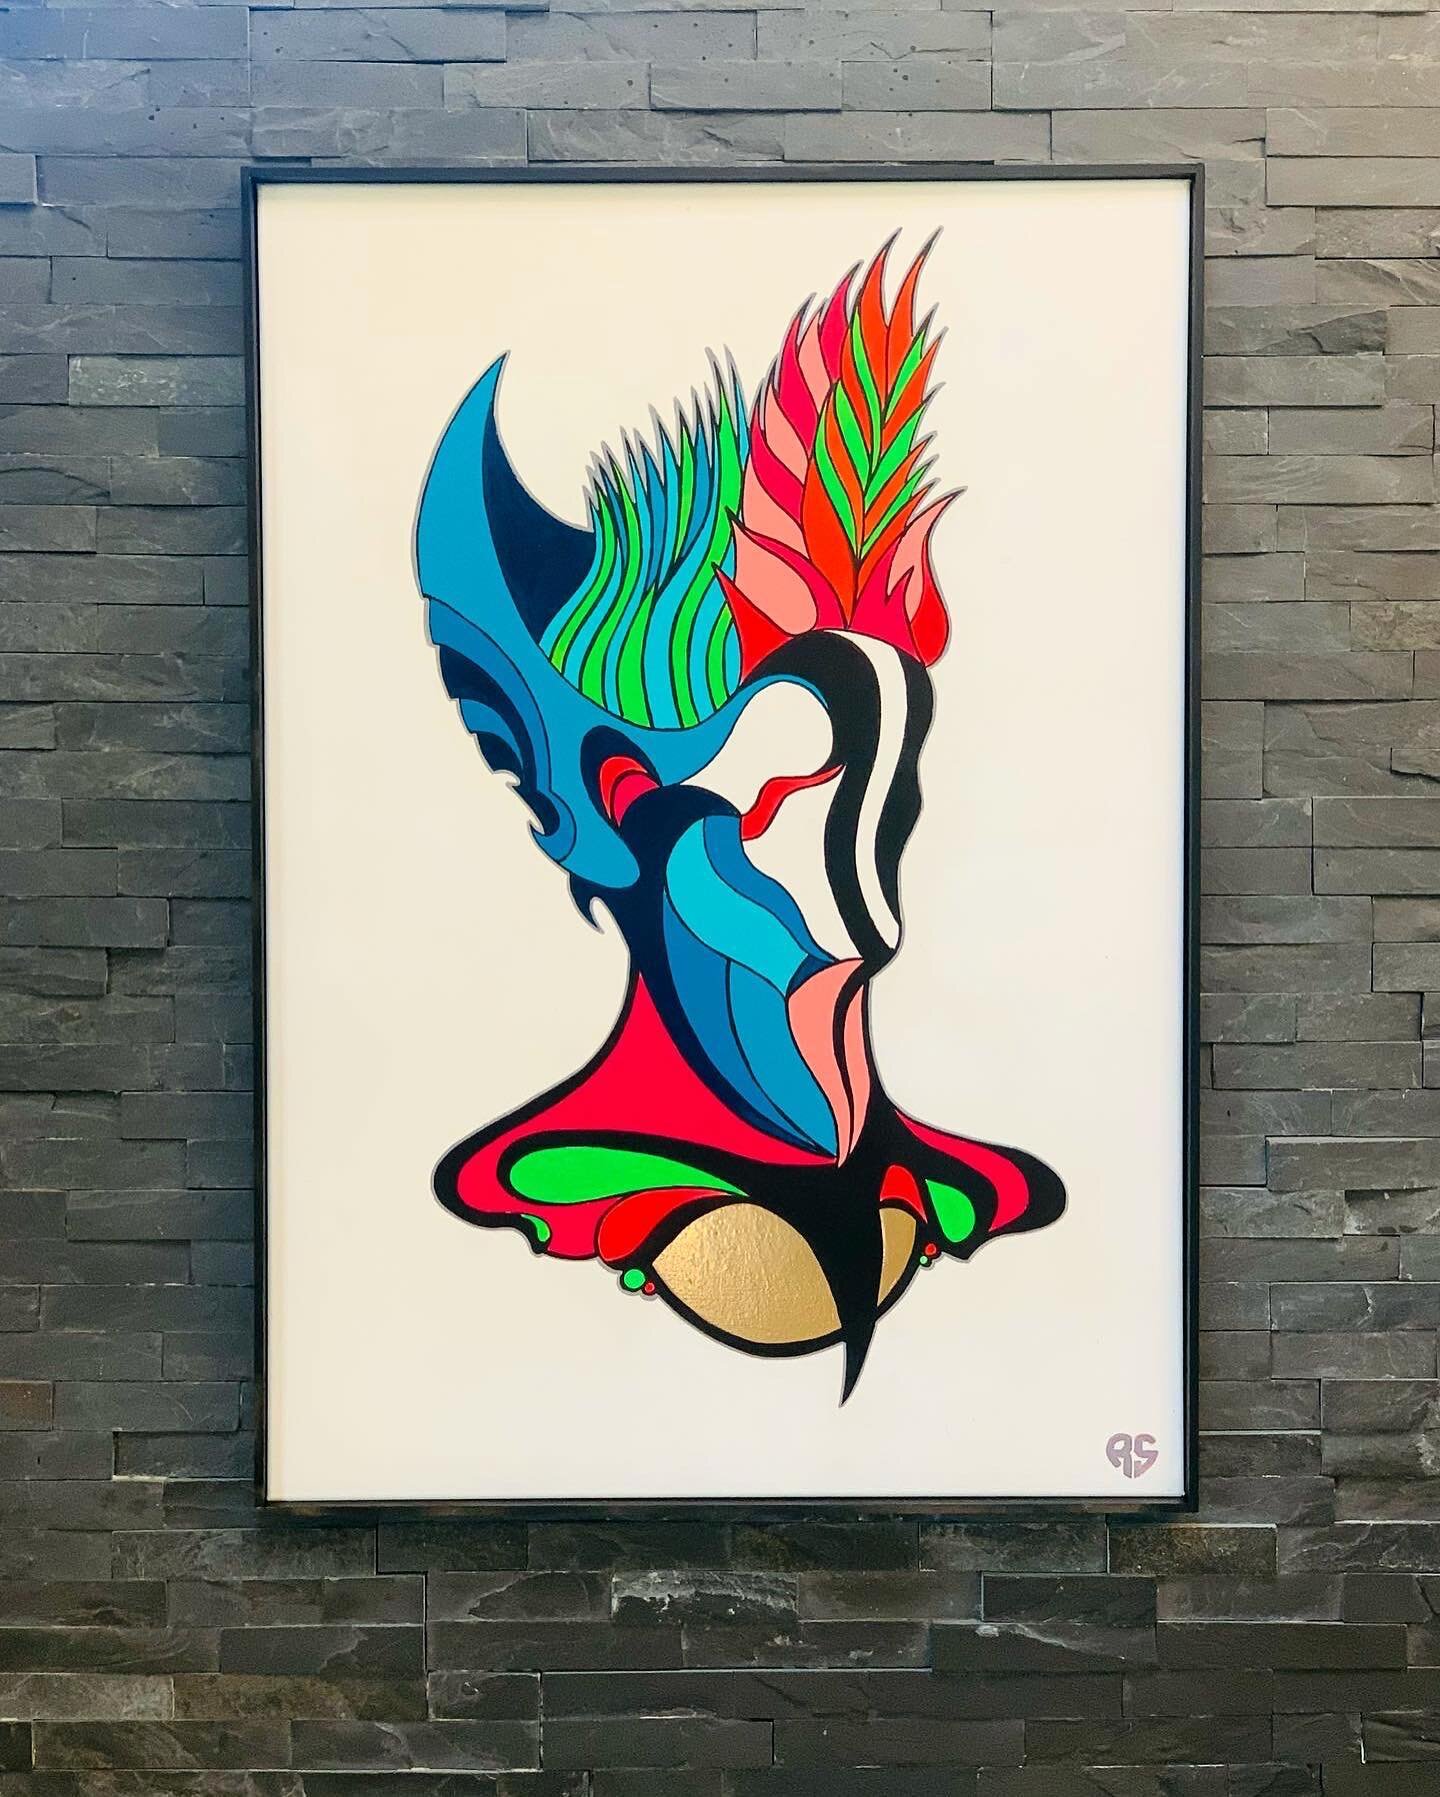 &lsquo;Native Alien&rsquo;
2023

Acryl 70x100cm

Just got back from an interesting journey, I&rsquo;ve encountered many strange beings and entities. I forgot to take pictures so I tried drawing one of them🤗

(Prints available)

#painting #prints #ps